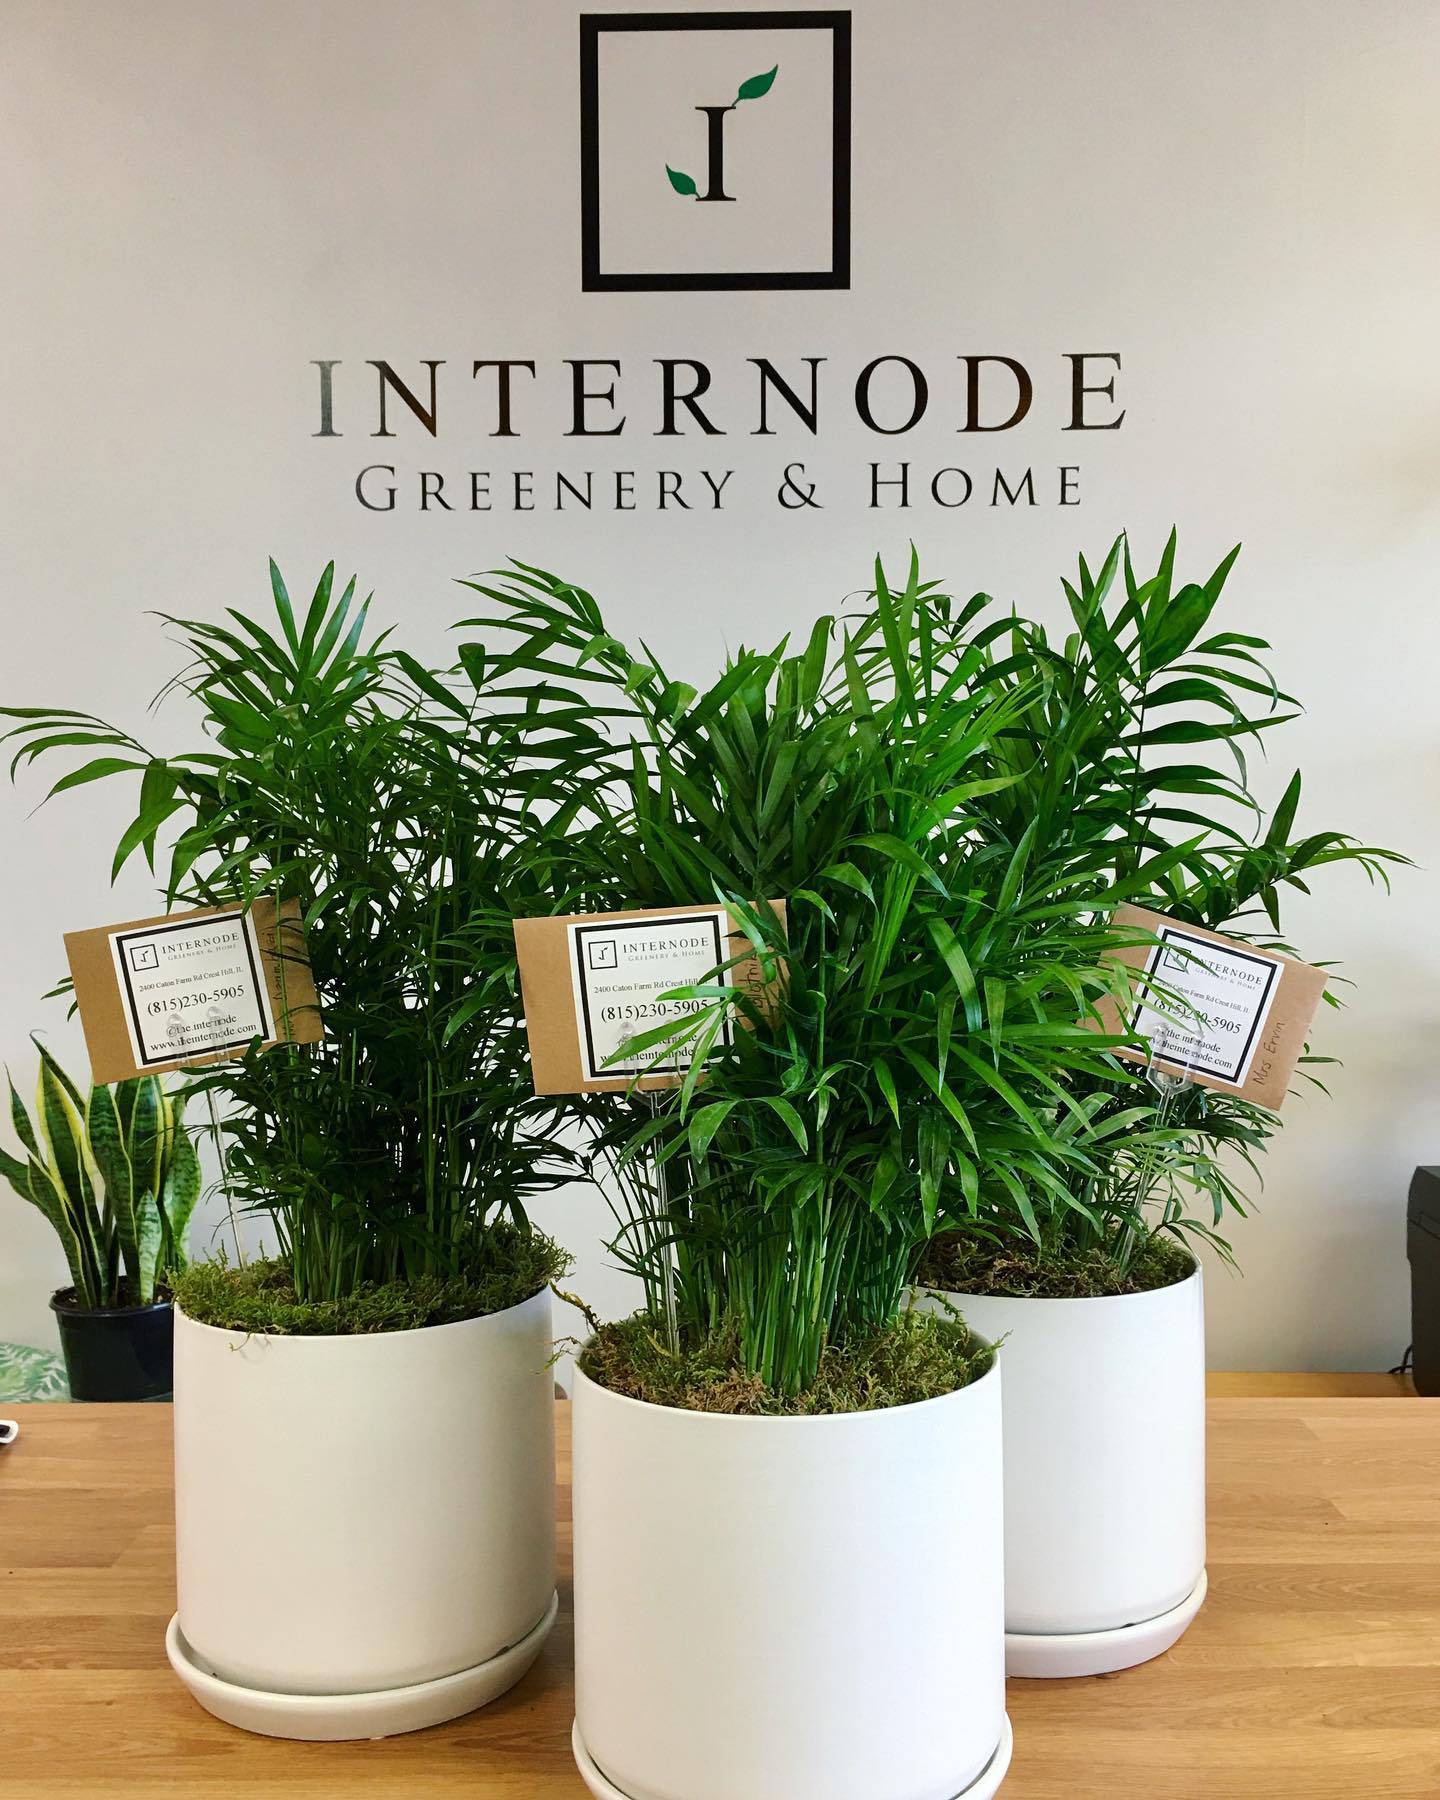 Crest Hill’s Internode Greenery & Home